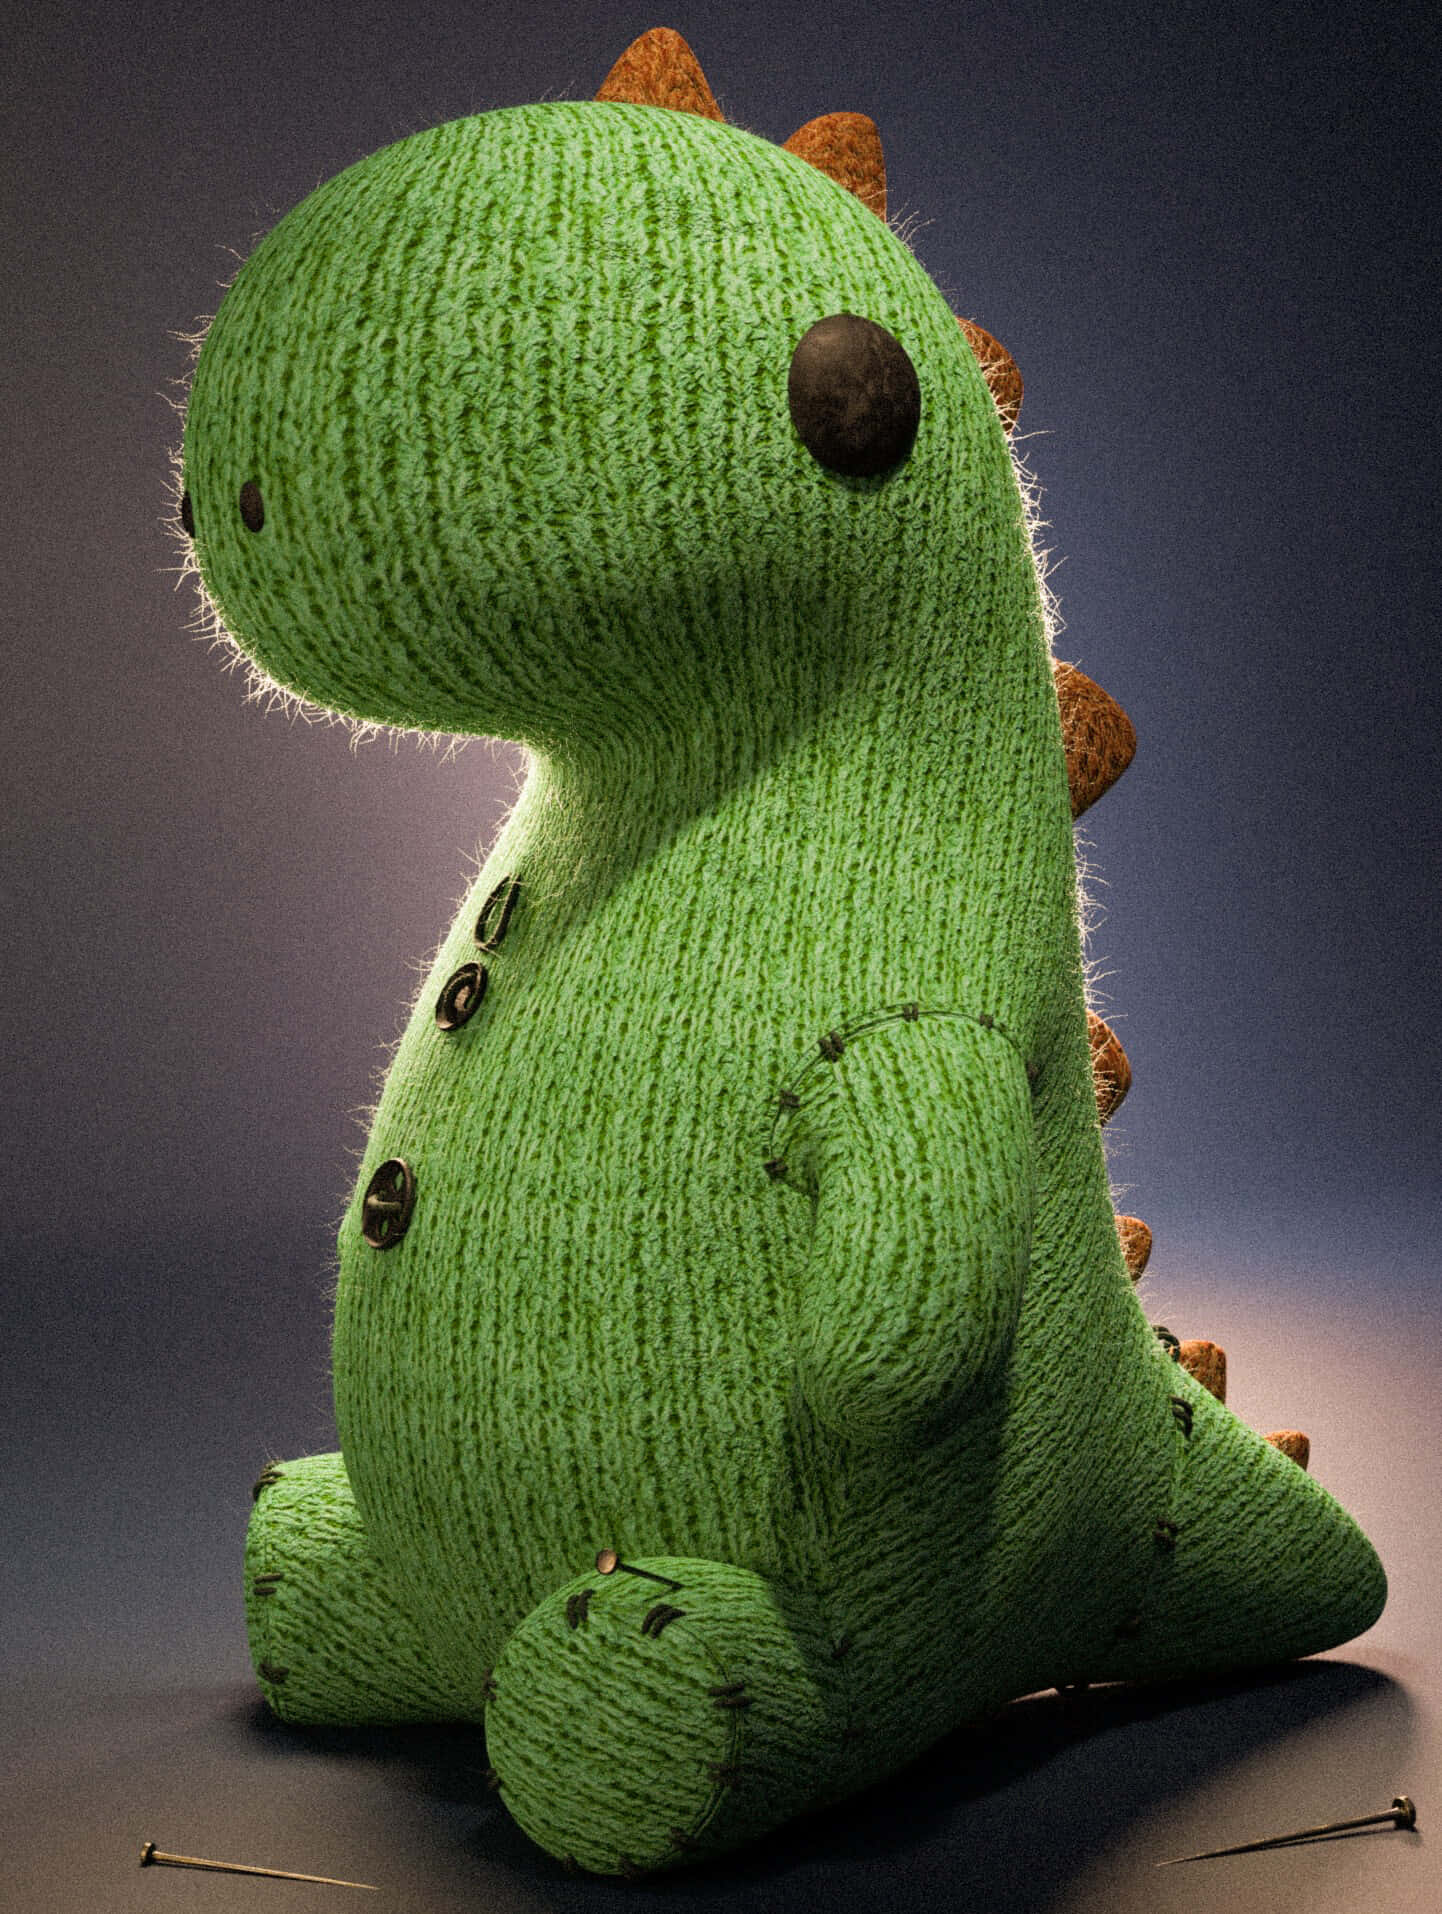 Cute Dino Crochet Toy Picture